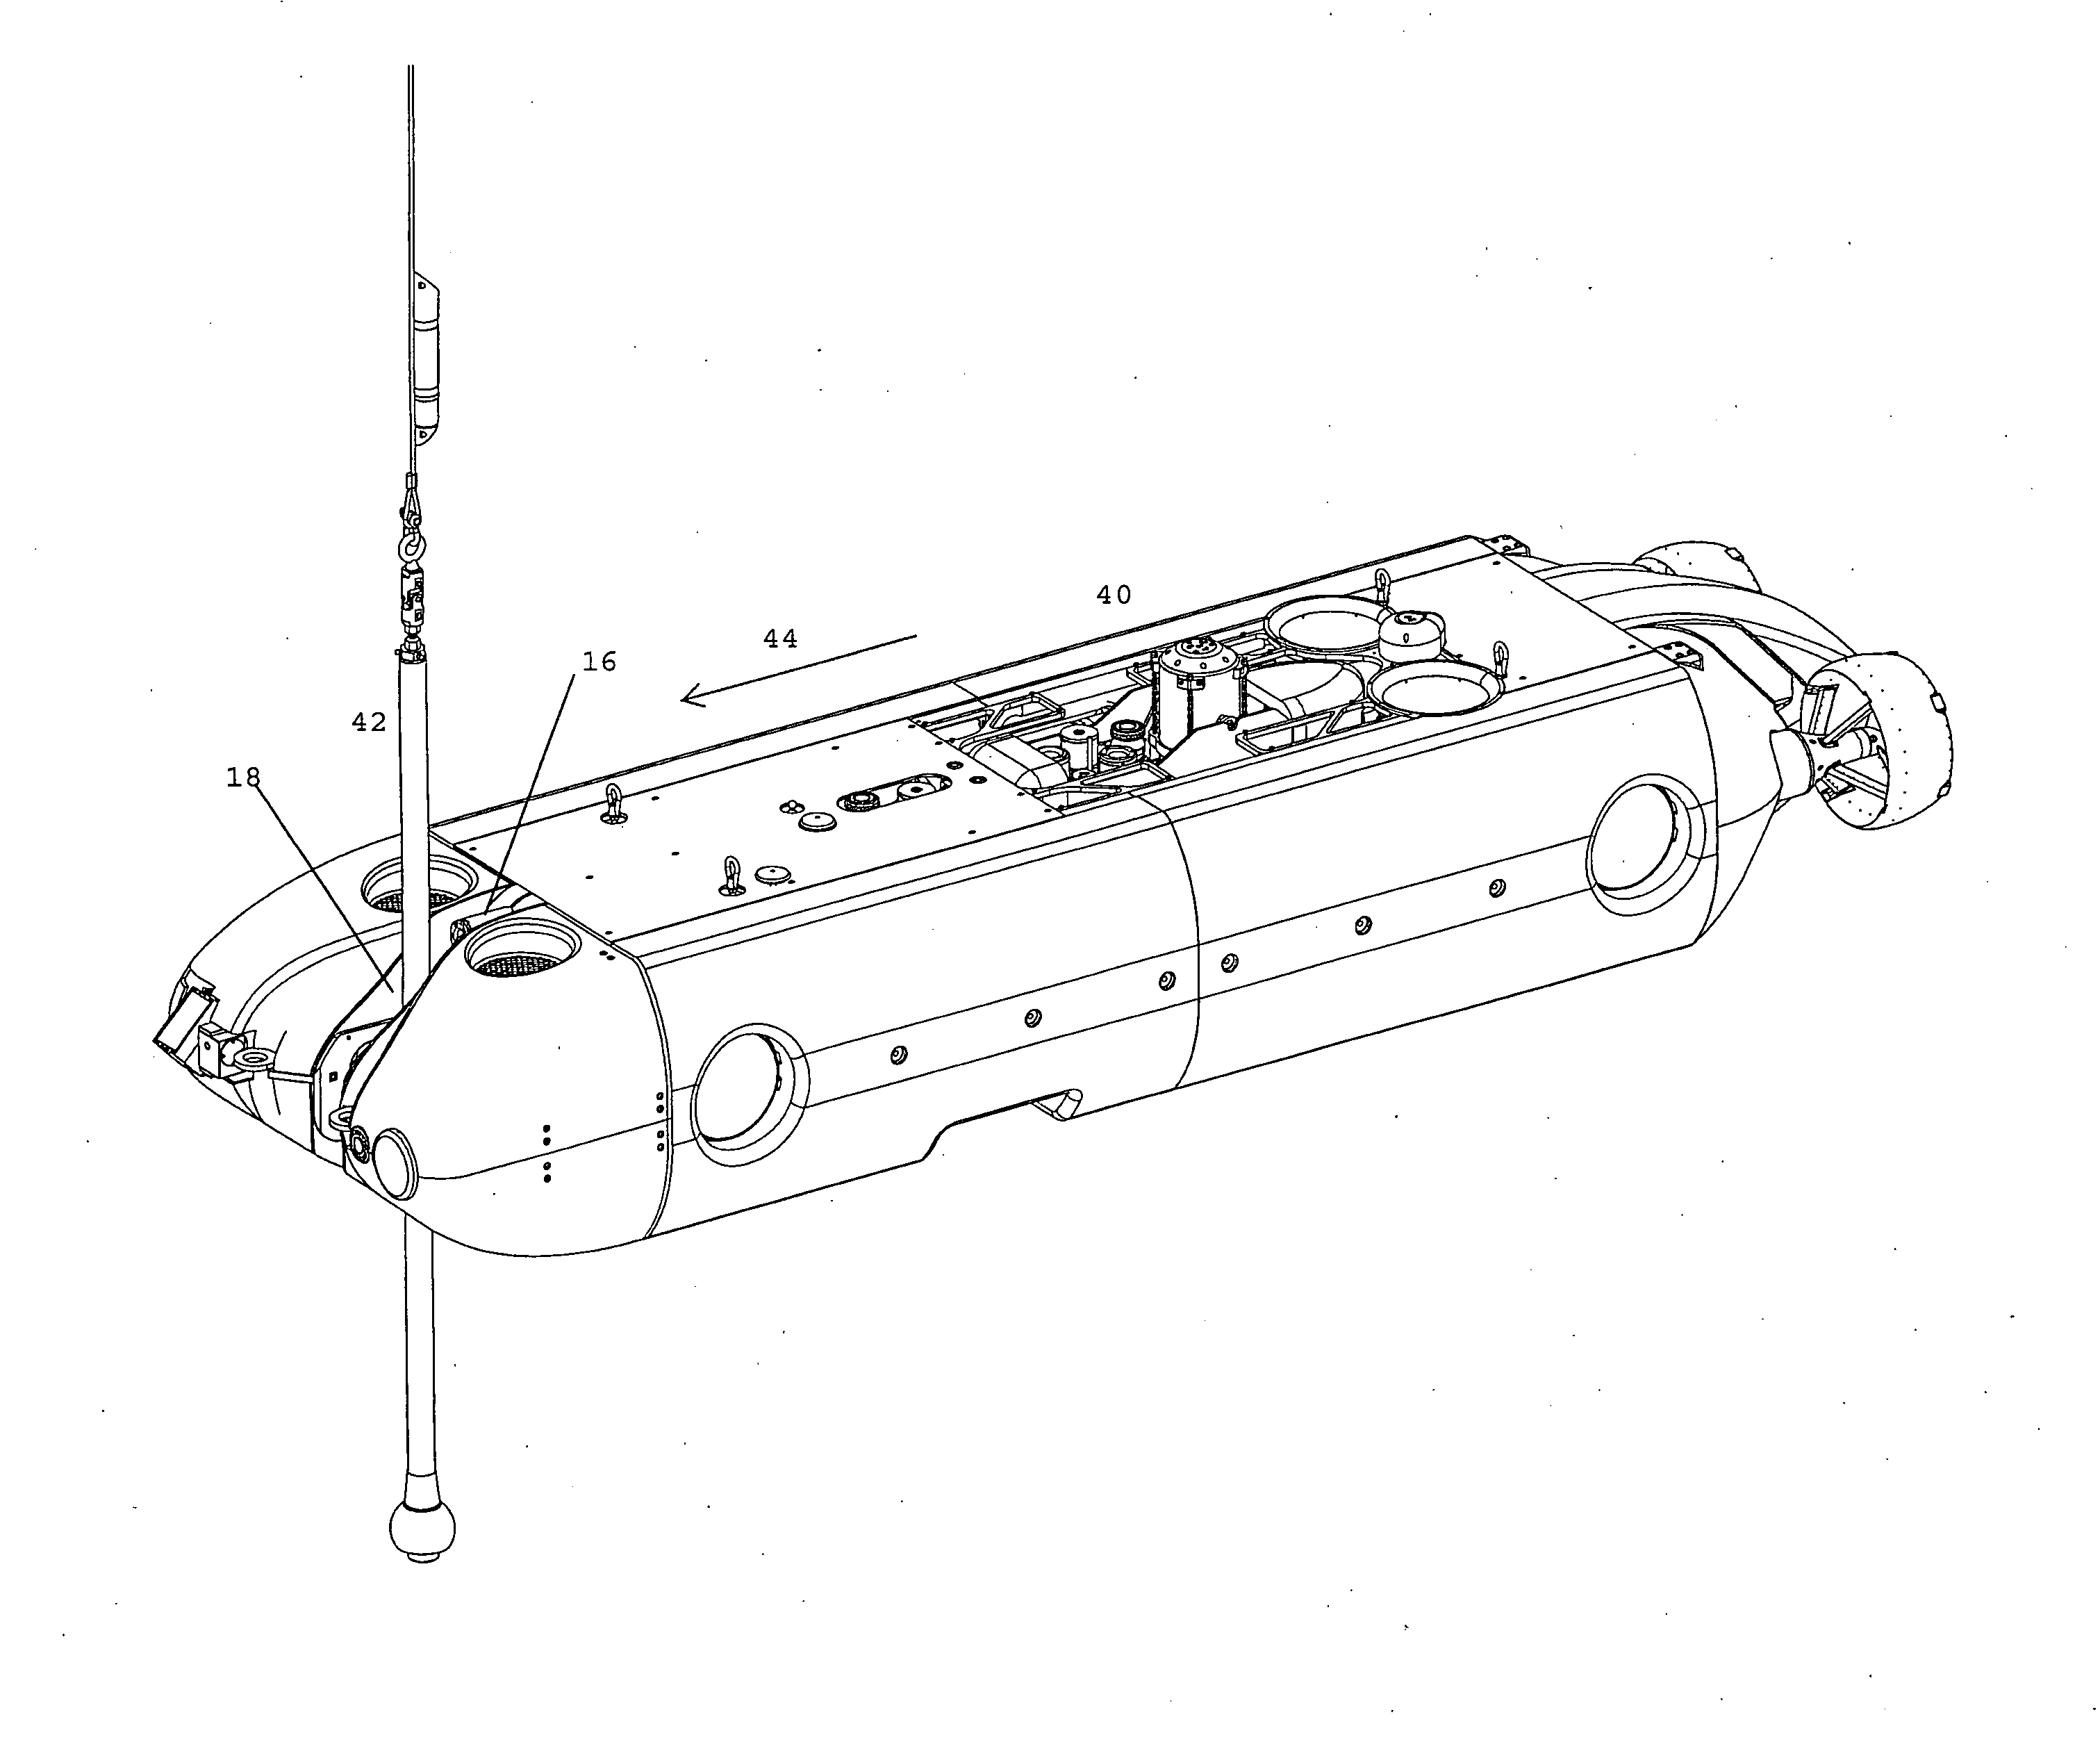 System and Method for Automated Rendezvous, Docking and Capture of Autonomous Underwater Vehicles